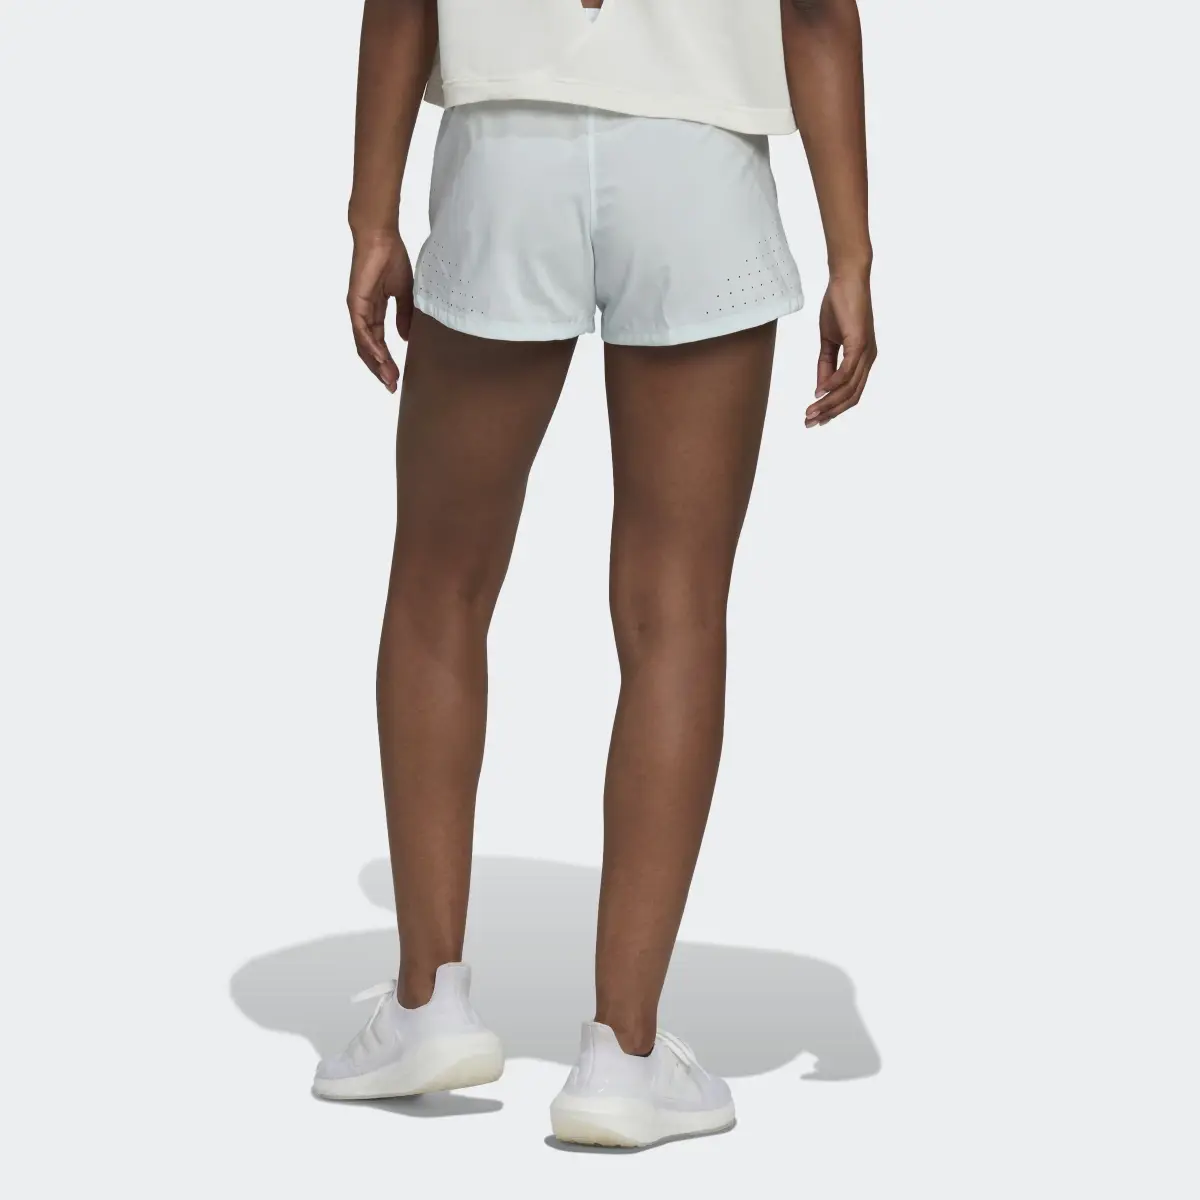 Adidas Perforated Pacer Shorts. 2